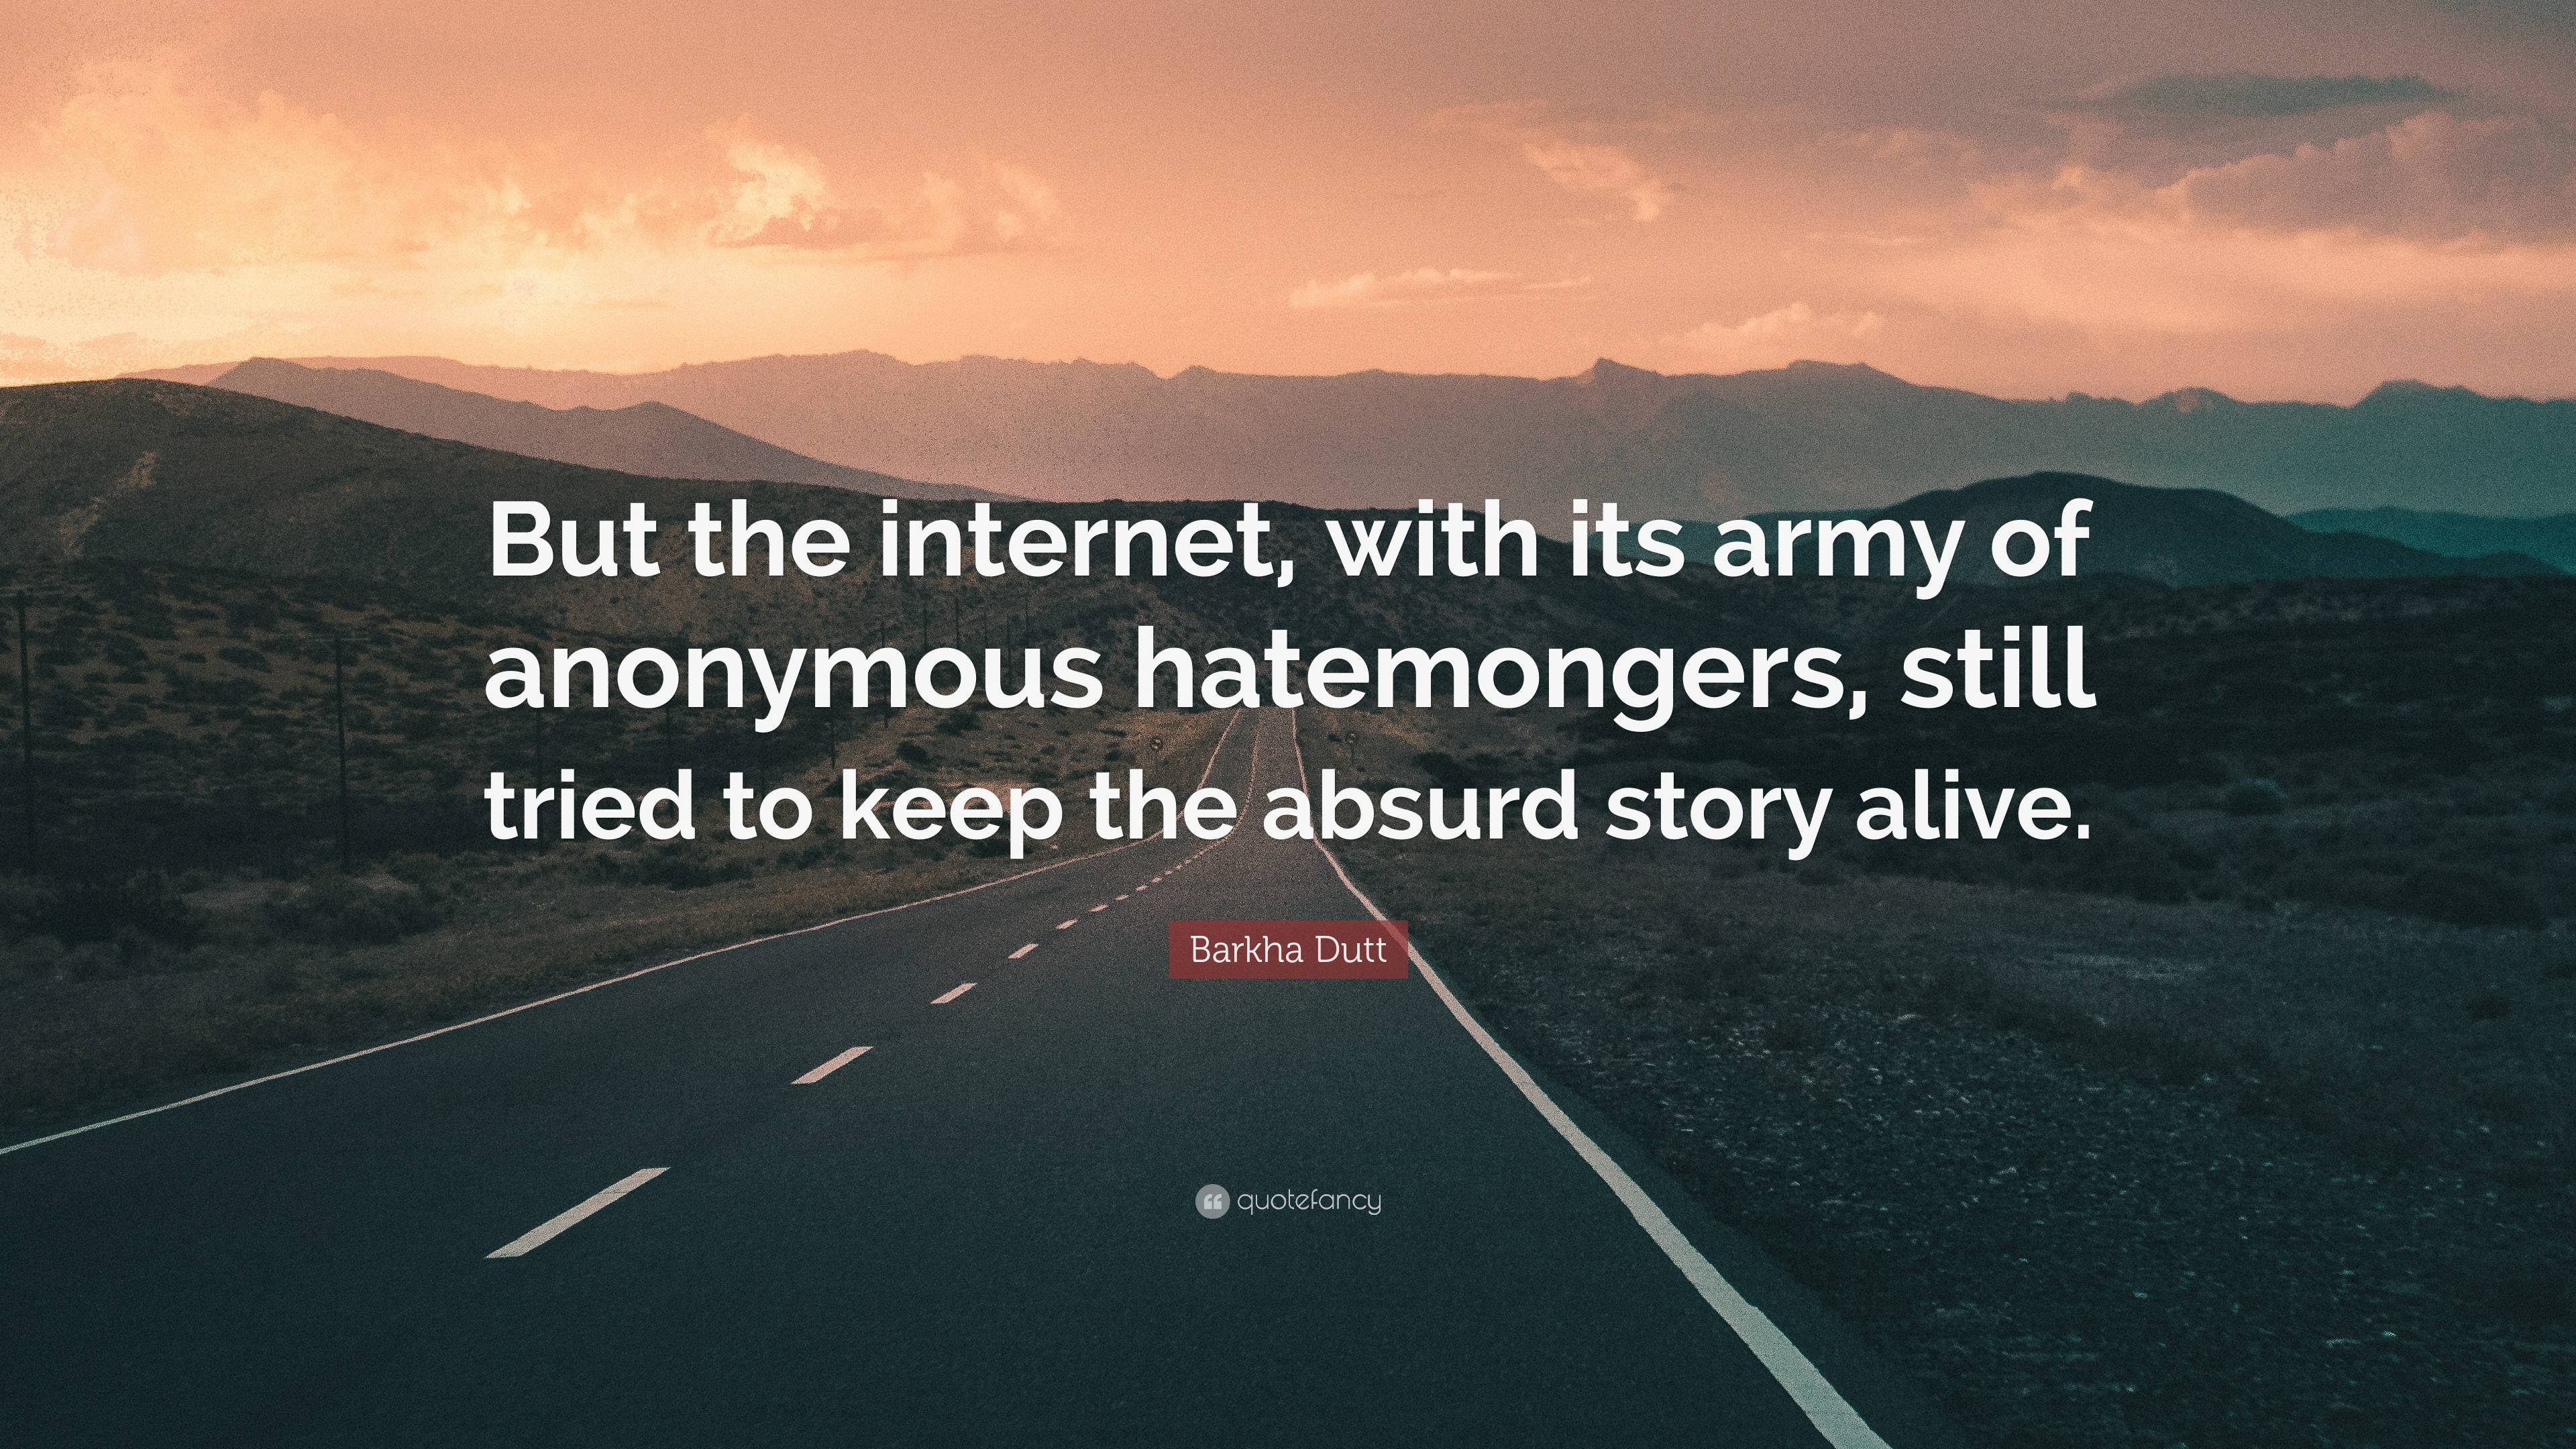 Barkha Dutt Quote “but The Internet With Its Army Of Anonymous Hatemongers Still Tried To